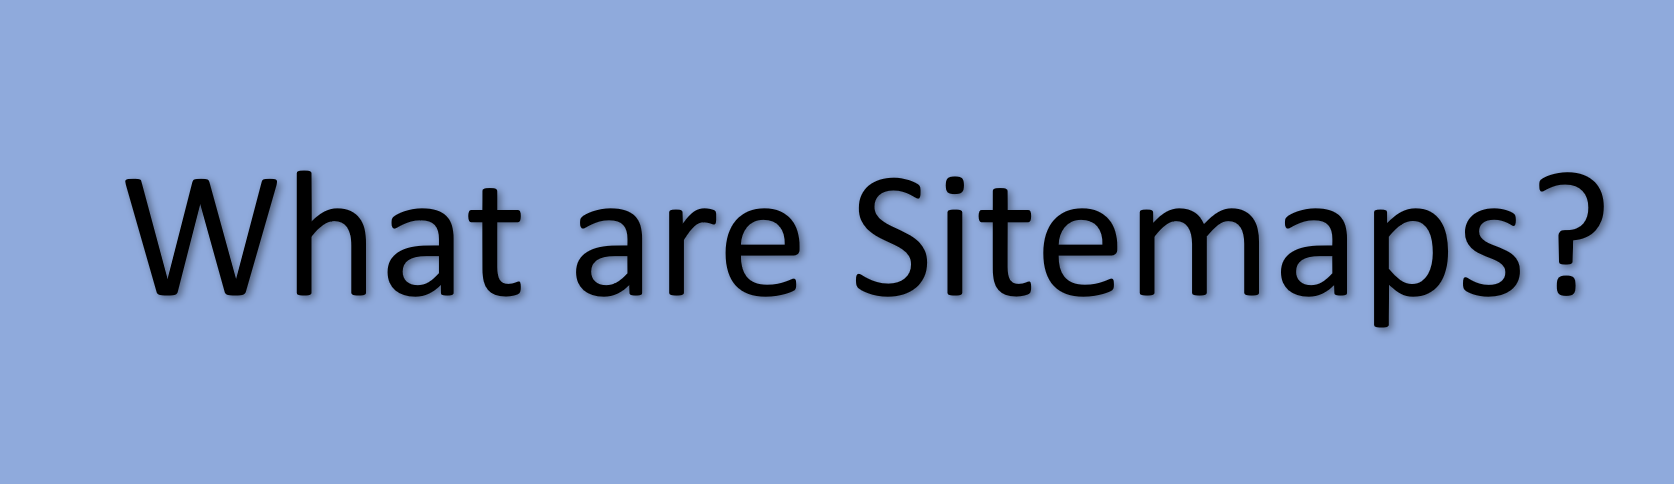 What is a Sitemap?